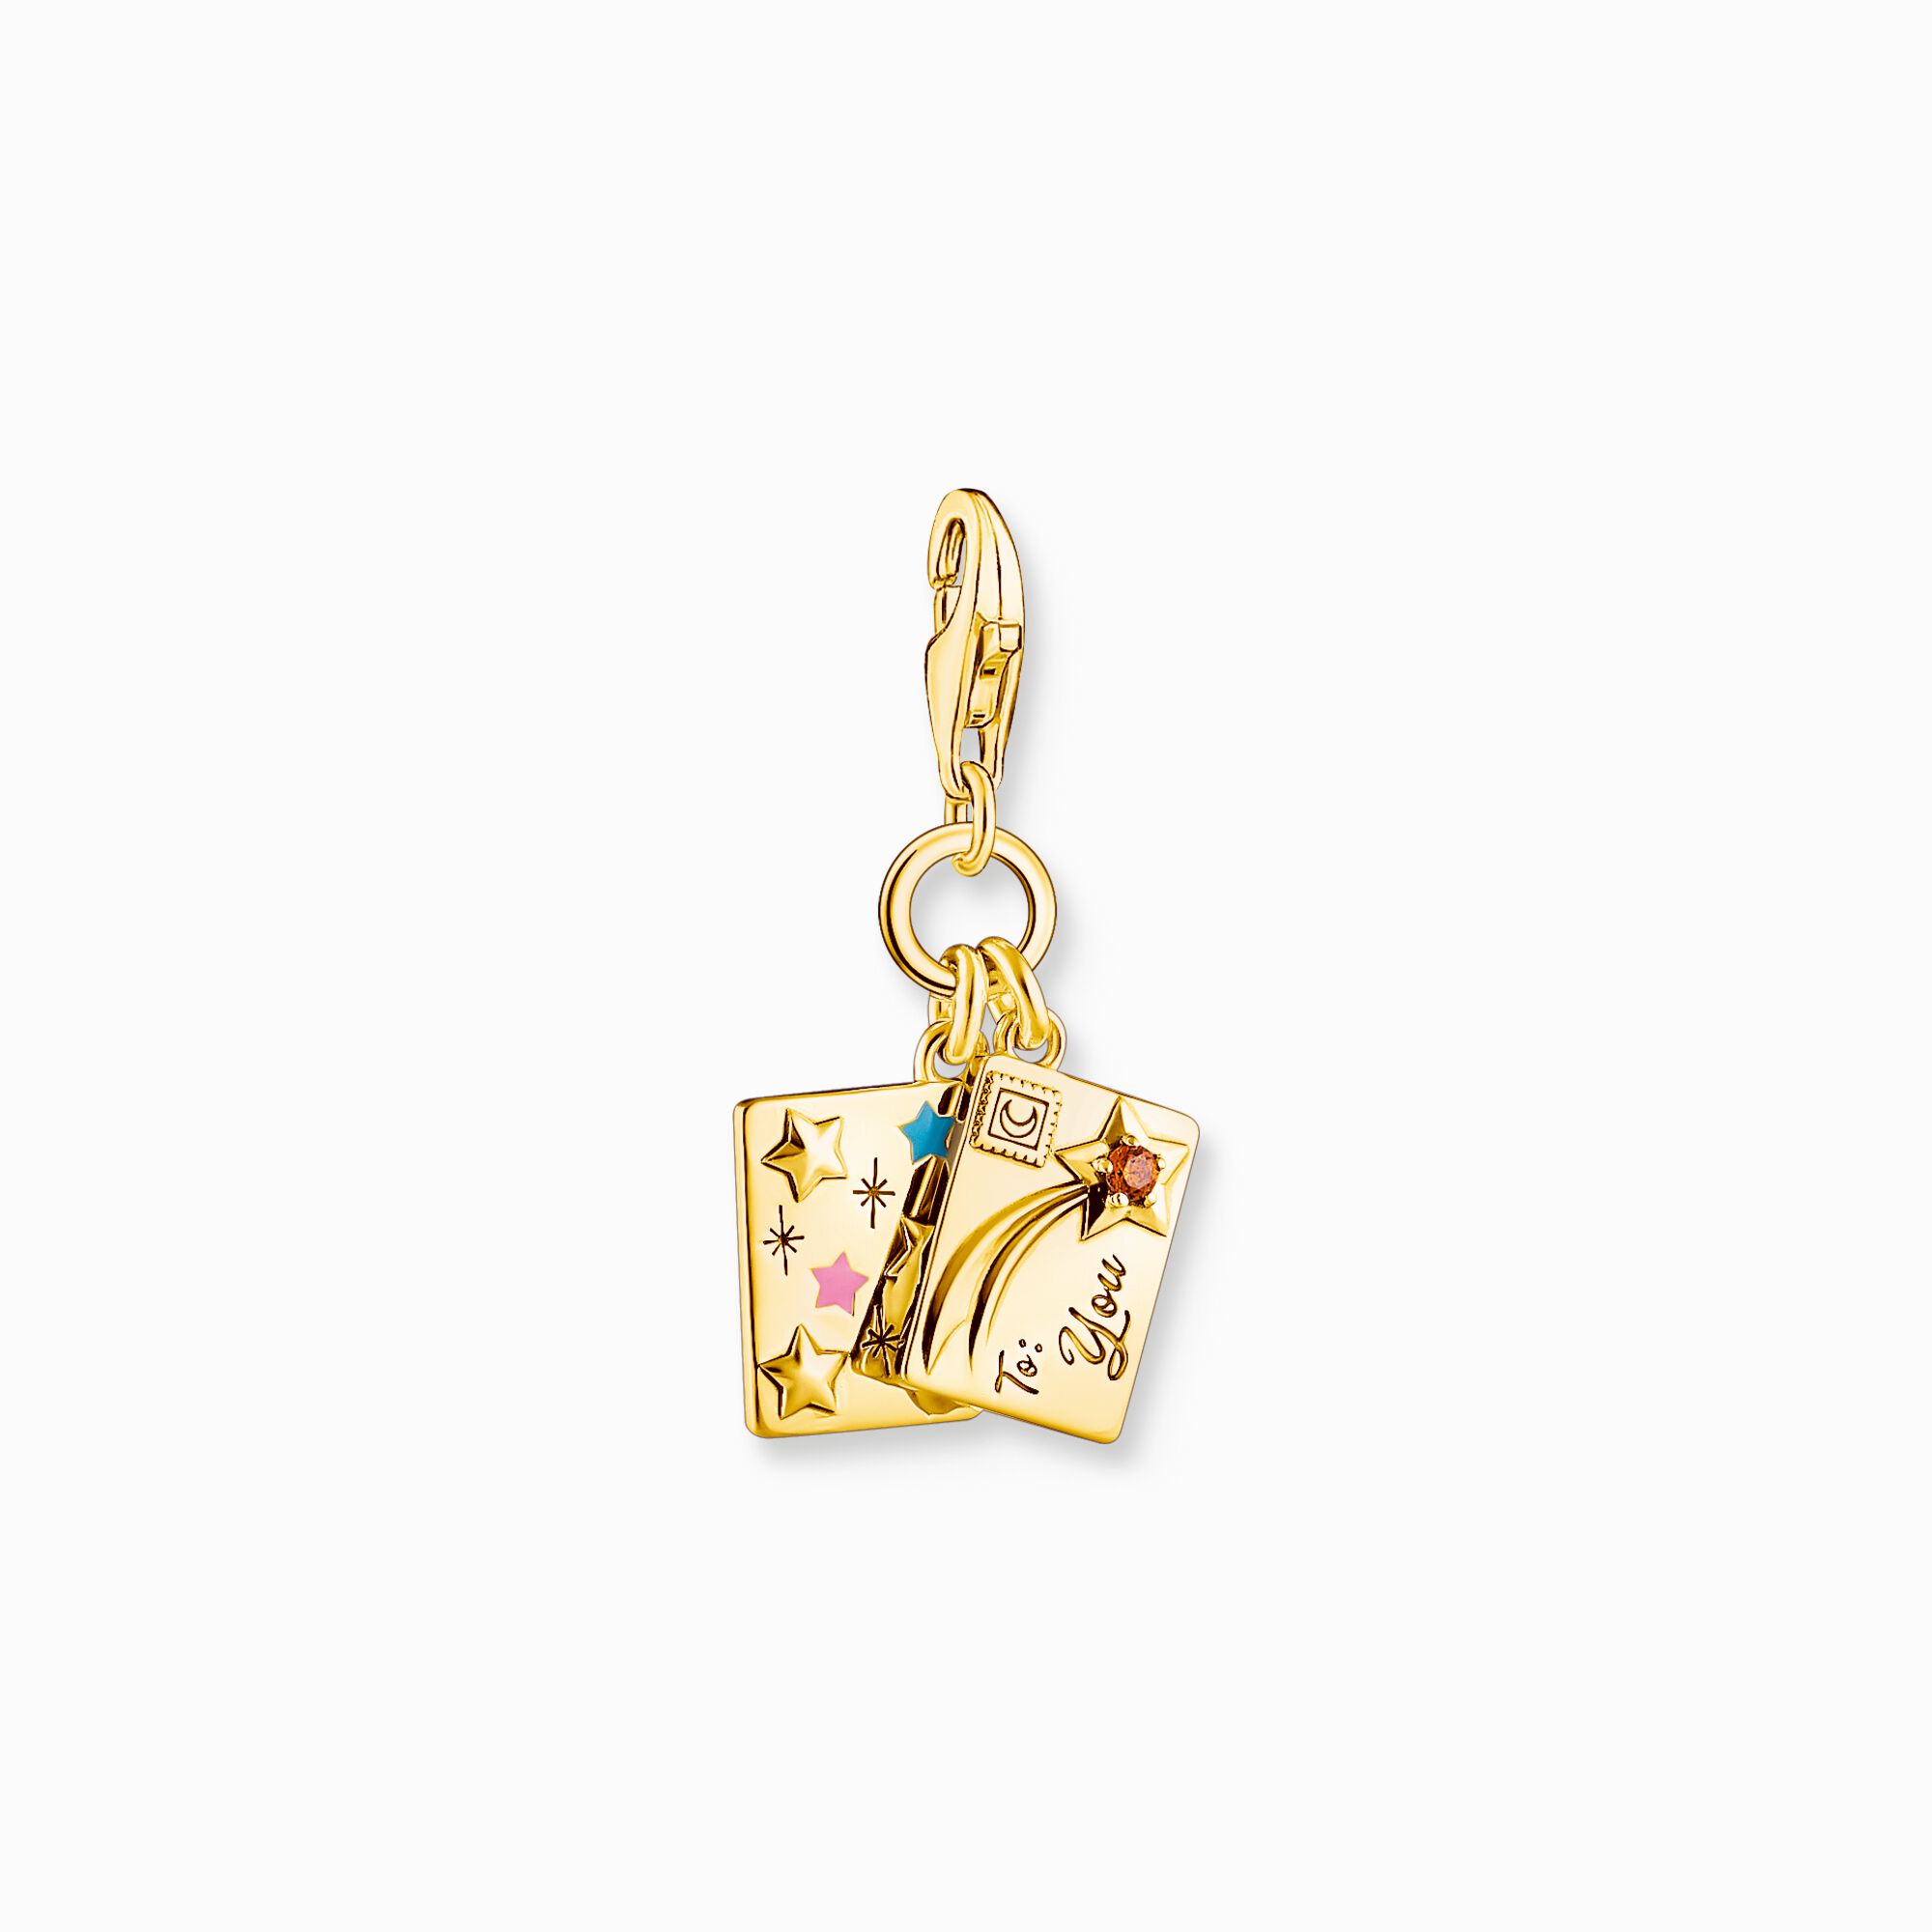 Gold-plated charm pendant letter with stones and engraving from the Charm Club collection in the THOMAS SABO online store